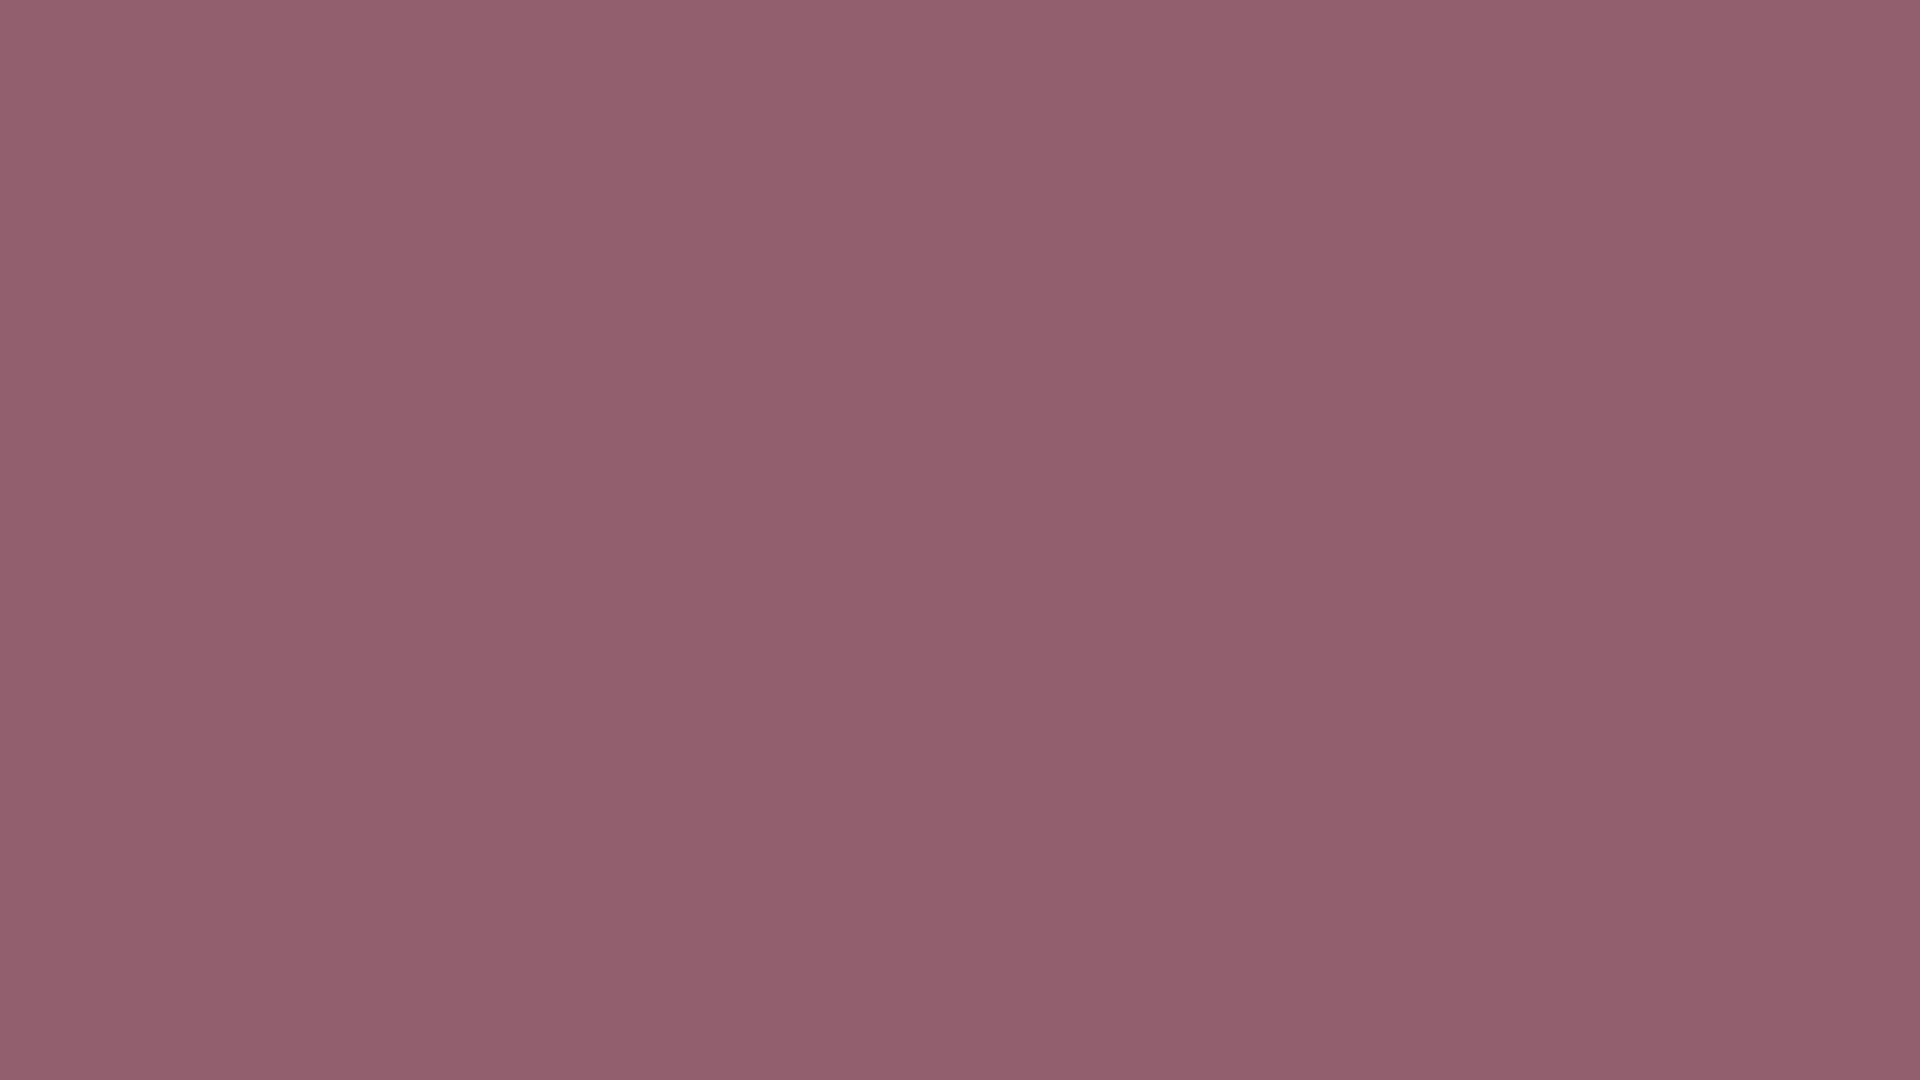 1920x1080 Mauve Taupe Solid Color Background